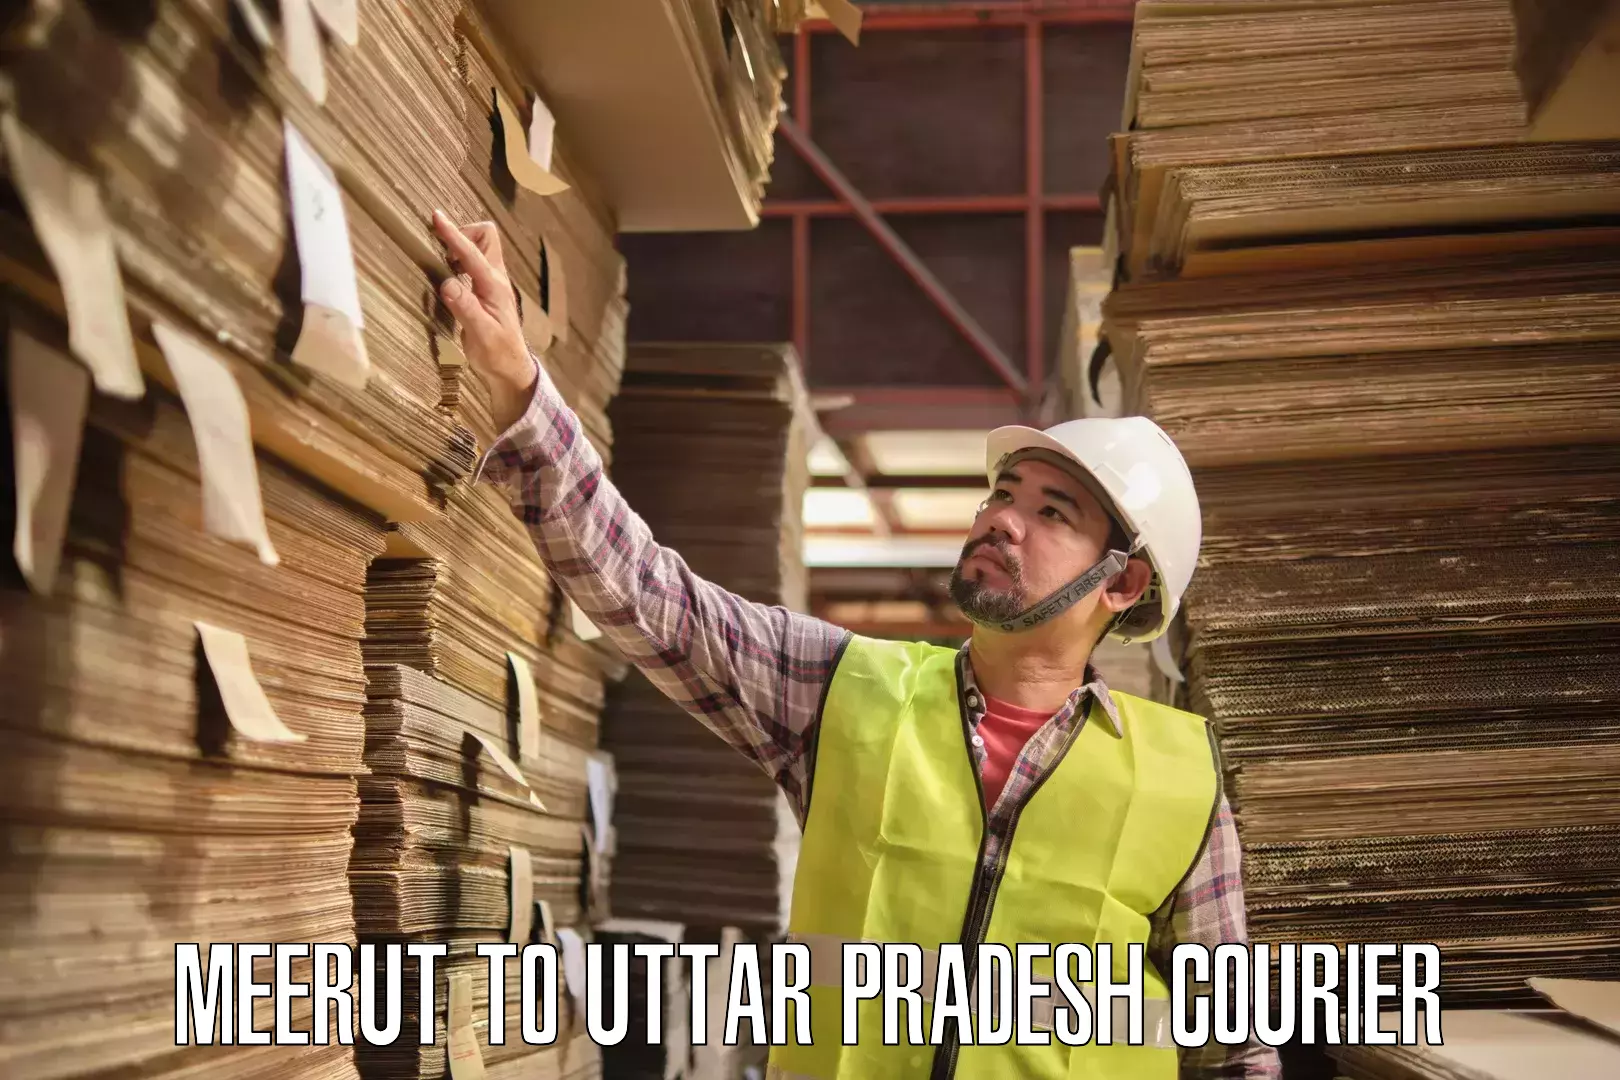 Professional courier handling Meerut to Sohgaura